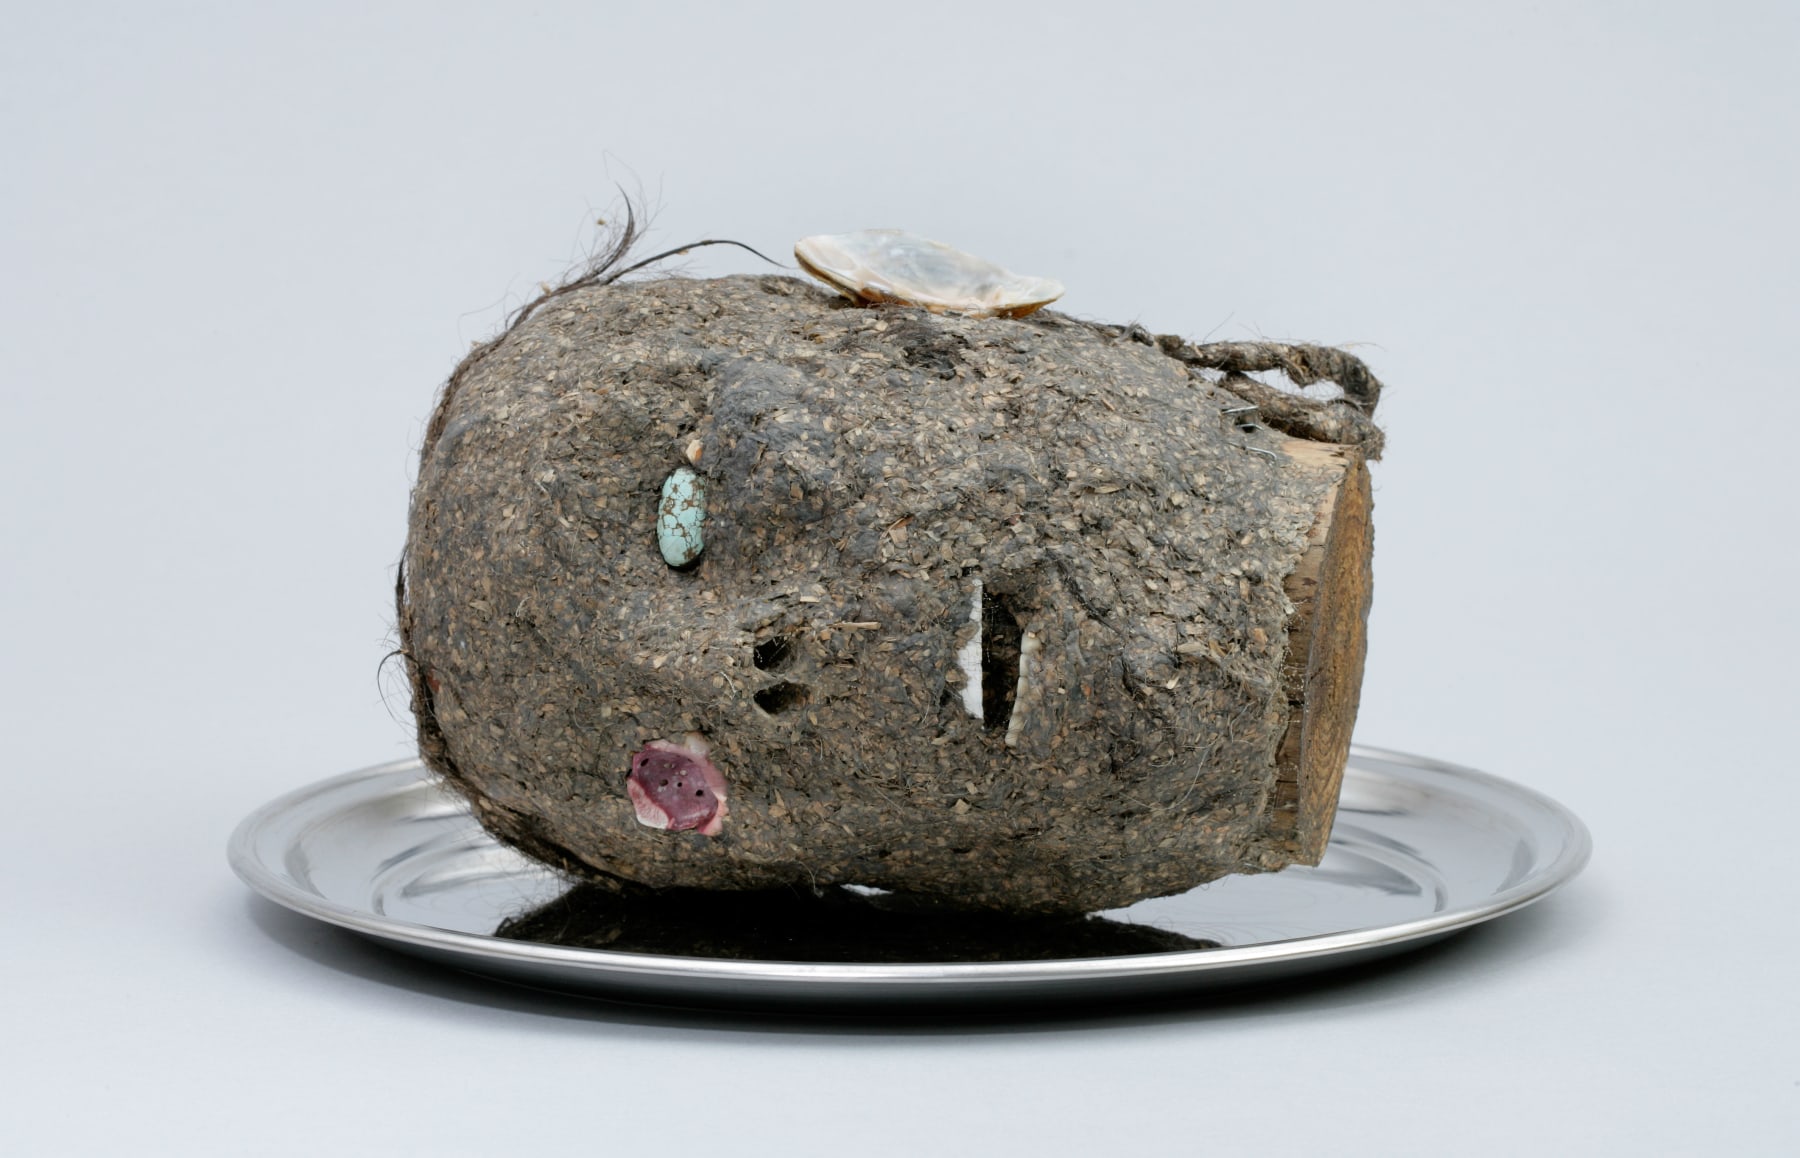 head, 2006 wood, paper mache, hair, seashell, turquoise and metal tray